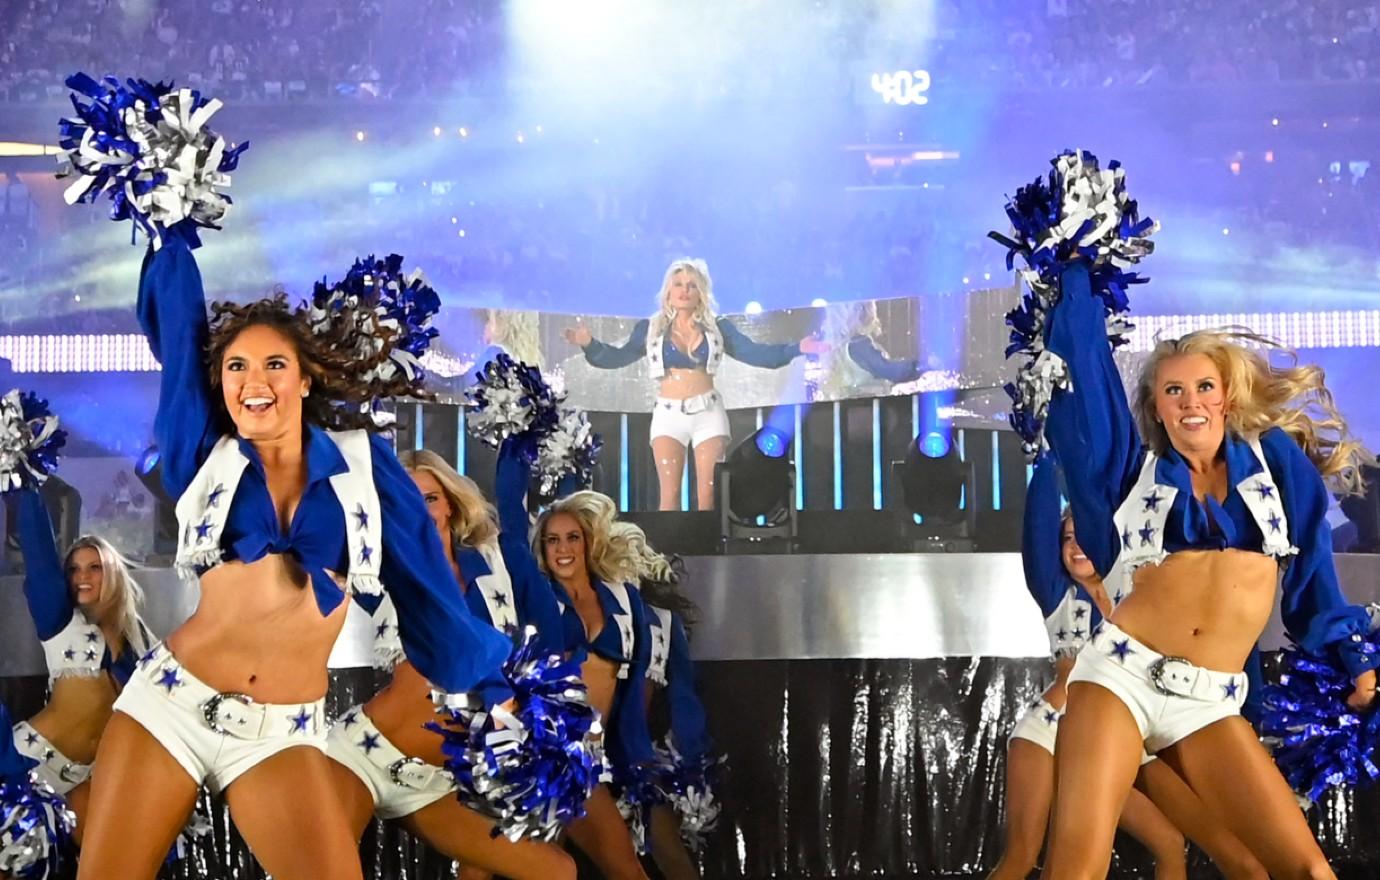 Country Rebel - Dolly Parton performed as a Dallas Cowboy's cheerleader  during halftime and left everyone's jaw on the floor, WATCH